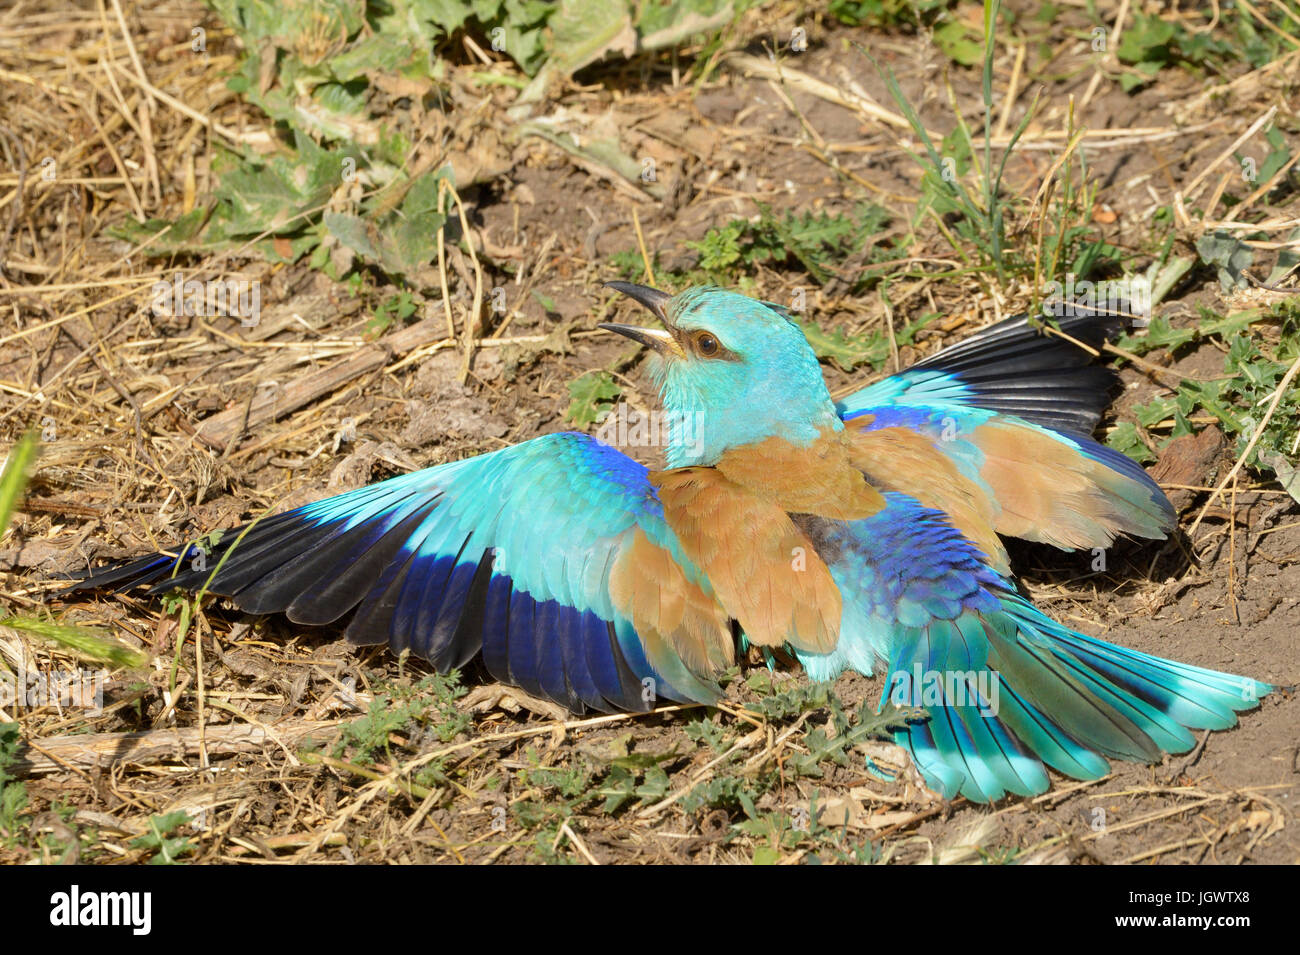 European Roller (Coracias garrulus) adult, cleaning his feathers in the sun and sand, Hortobagy national park, Hungary. Stock Photo